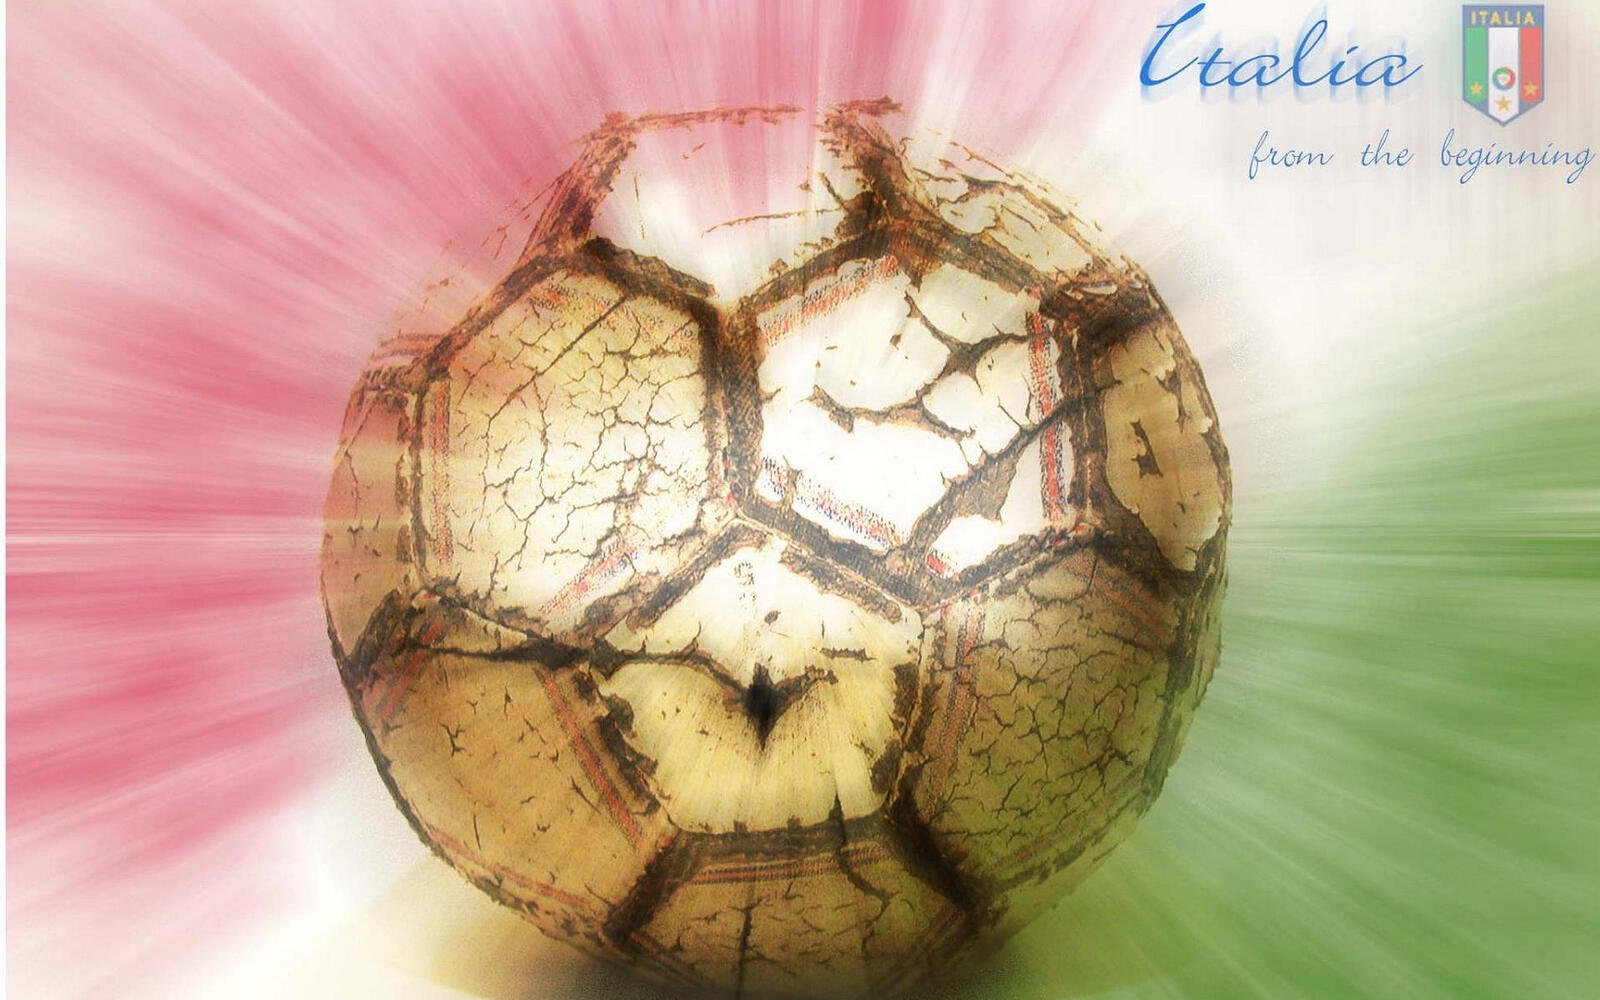 Wallpapers old Italy ball on the desktop